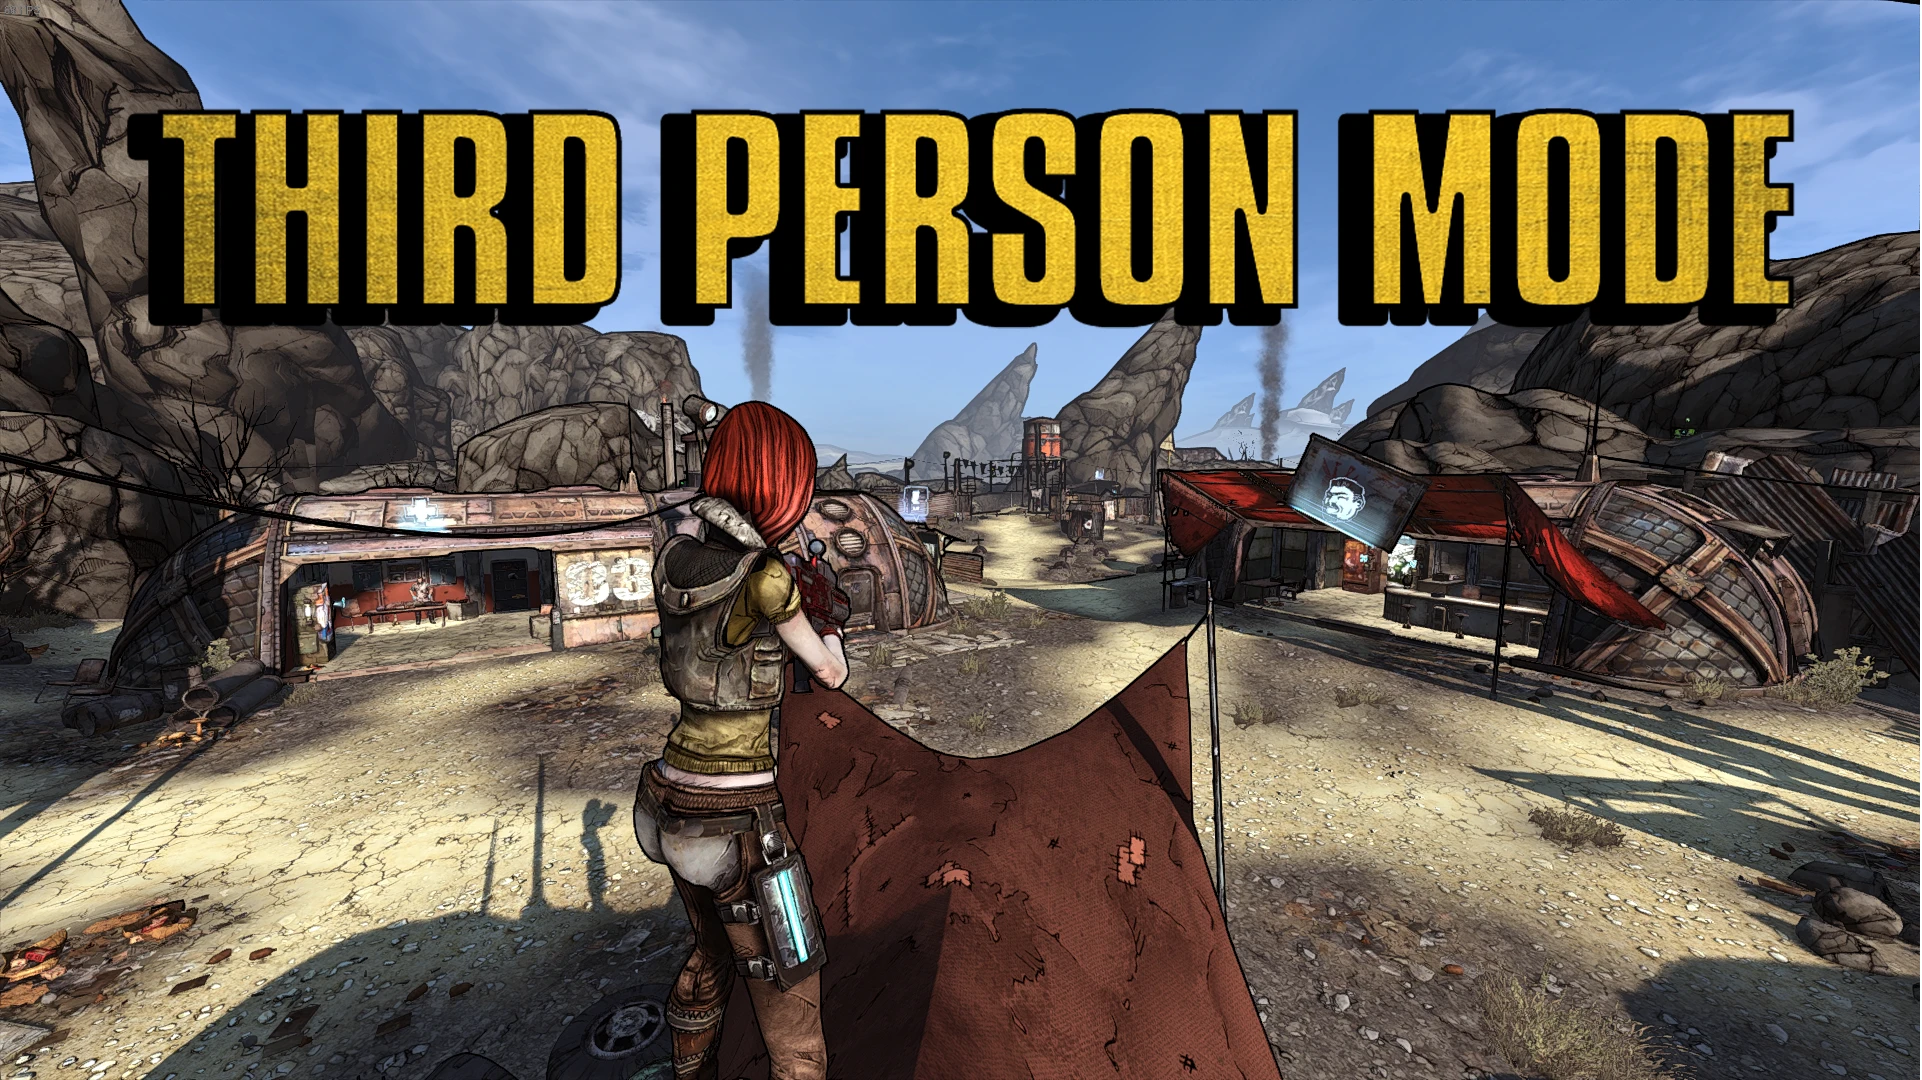 borderlands game of the year enhanced changes